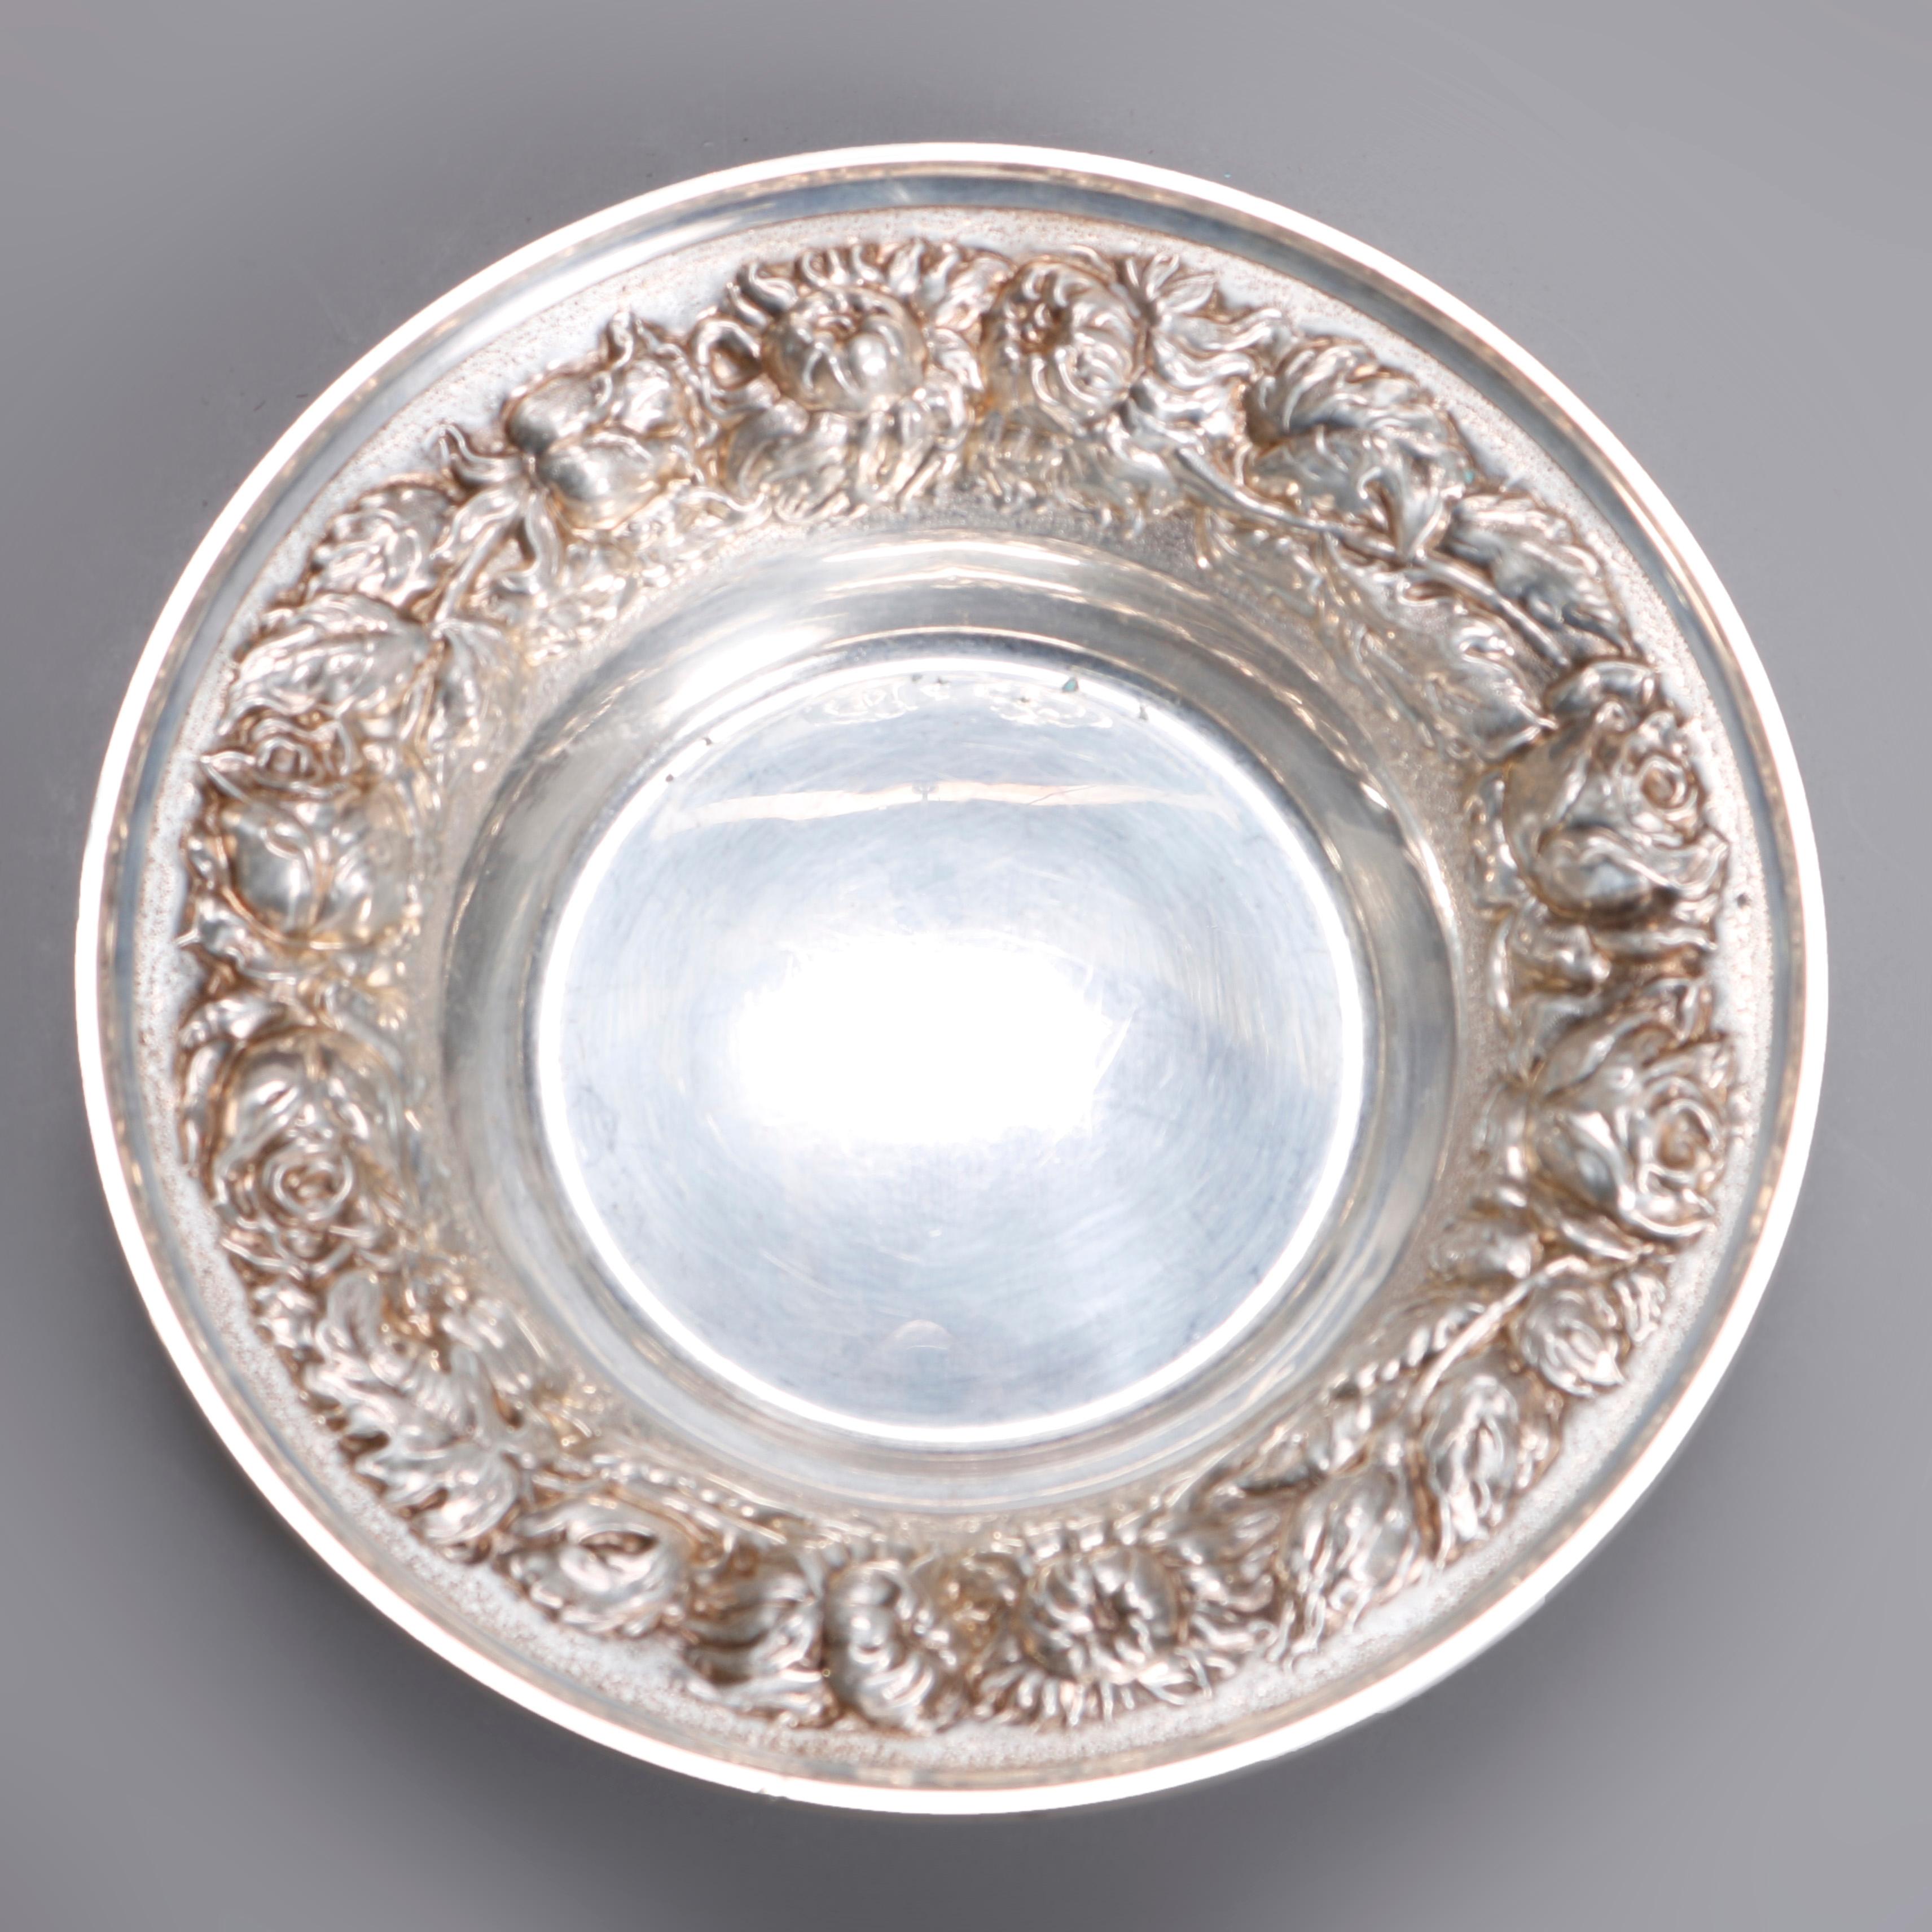 An antique pair of sterling silver nut or candy bowls by Kirk & Stieff offer foliate and fruit repousse decoration, one with ball feet, 6.7 toz total, circa 1900
Repousse bowls, circa 1900 6.7 toz
Candy dishes
Measures: 1.5